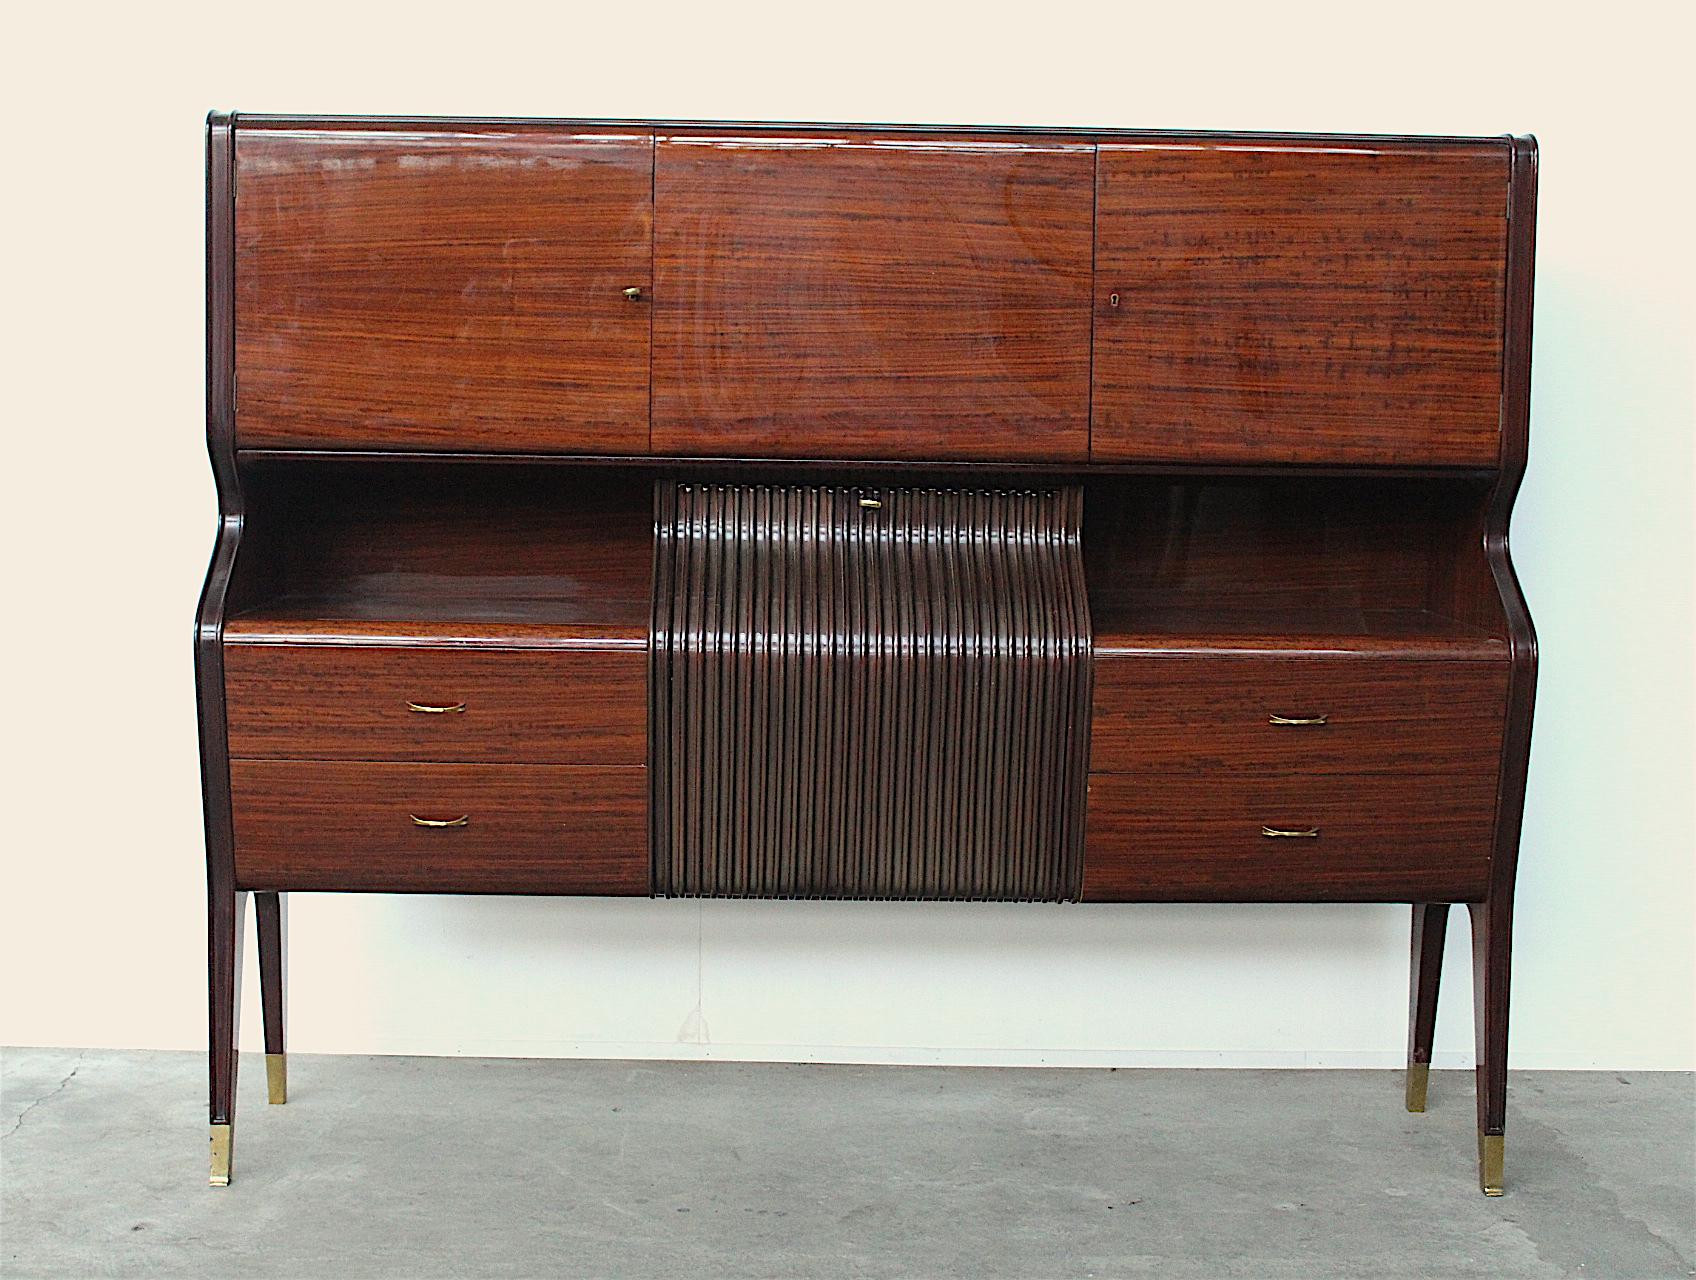 One of the most beautifully made pieces of midcentury furniture that I know of. This is a pre-Tecno piece by the hand of Borsani in his then-called Atelier Arradamenti Varedo, when the firm was housed in the North Italian town with the same name.